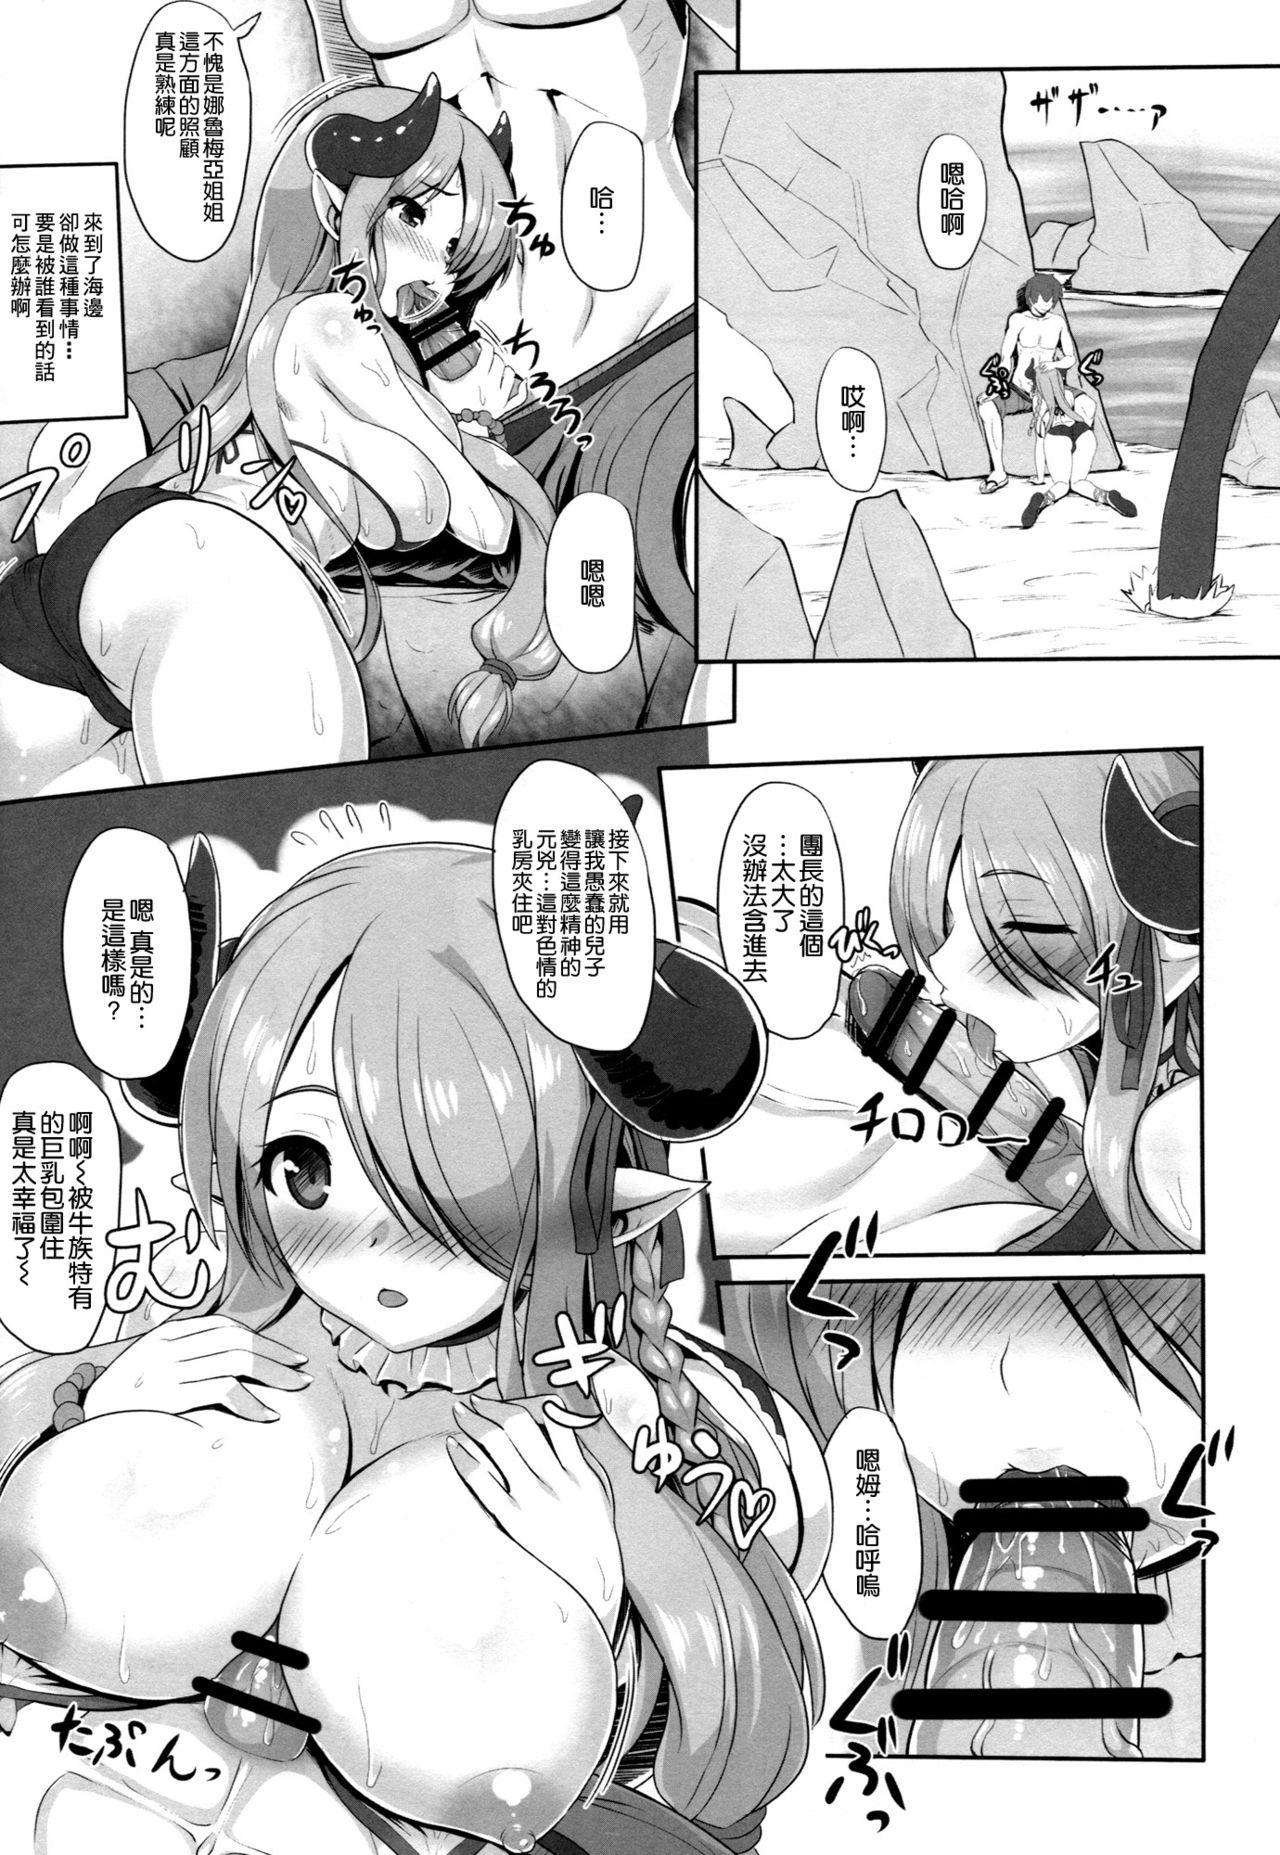 Awesome Sleepless summer - Granblue fantasy Eurobabe - Page 8